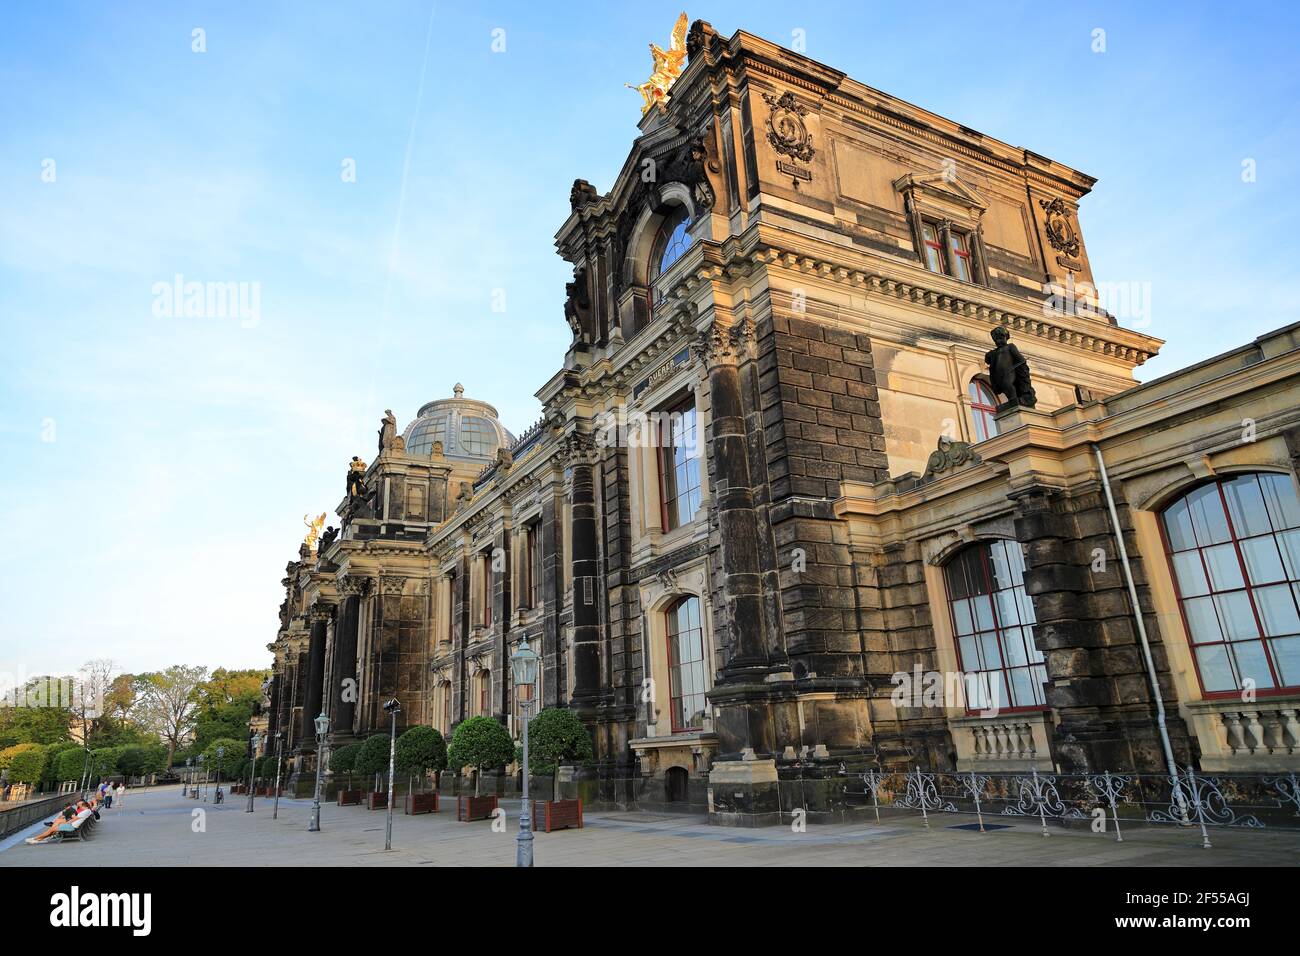 The Dresden Academy of Fine Arts on Brühl's Terrace, view of the front side. Dresden, Saxony, Germany, Europe. Stock Photo